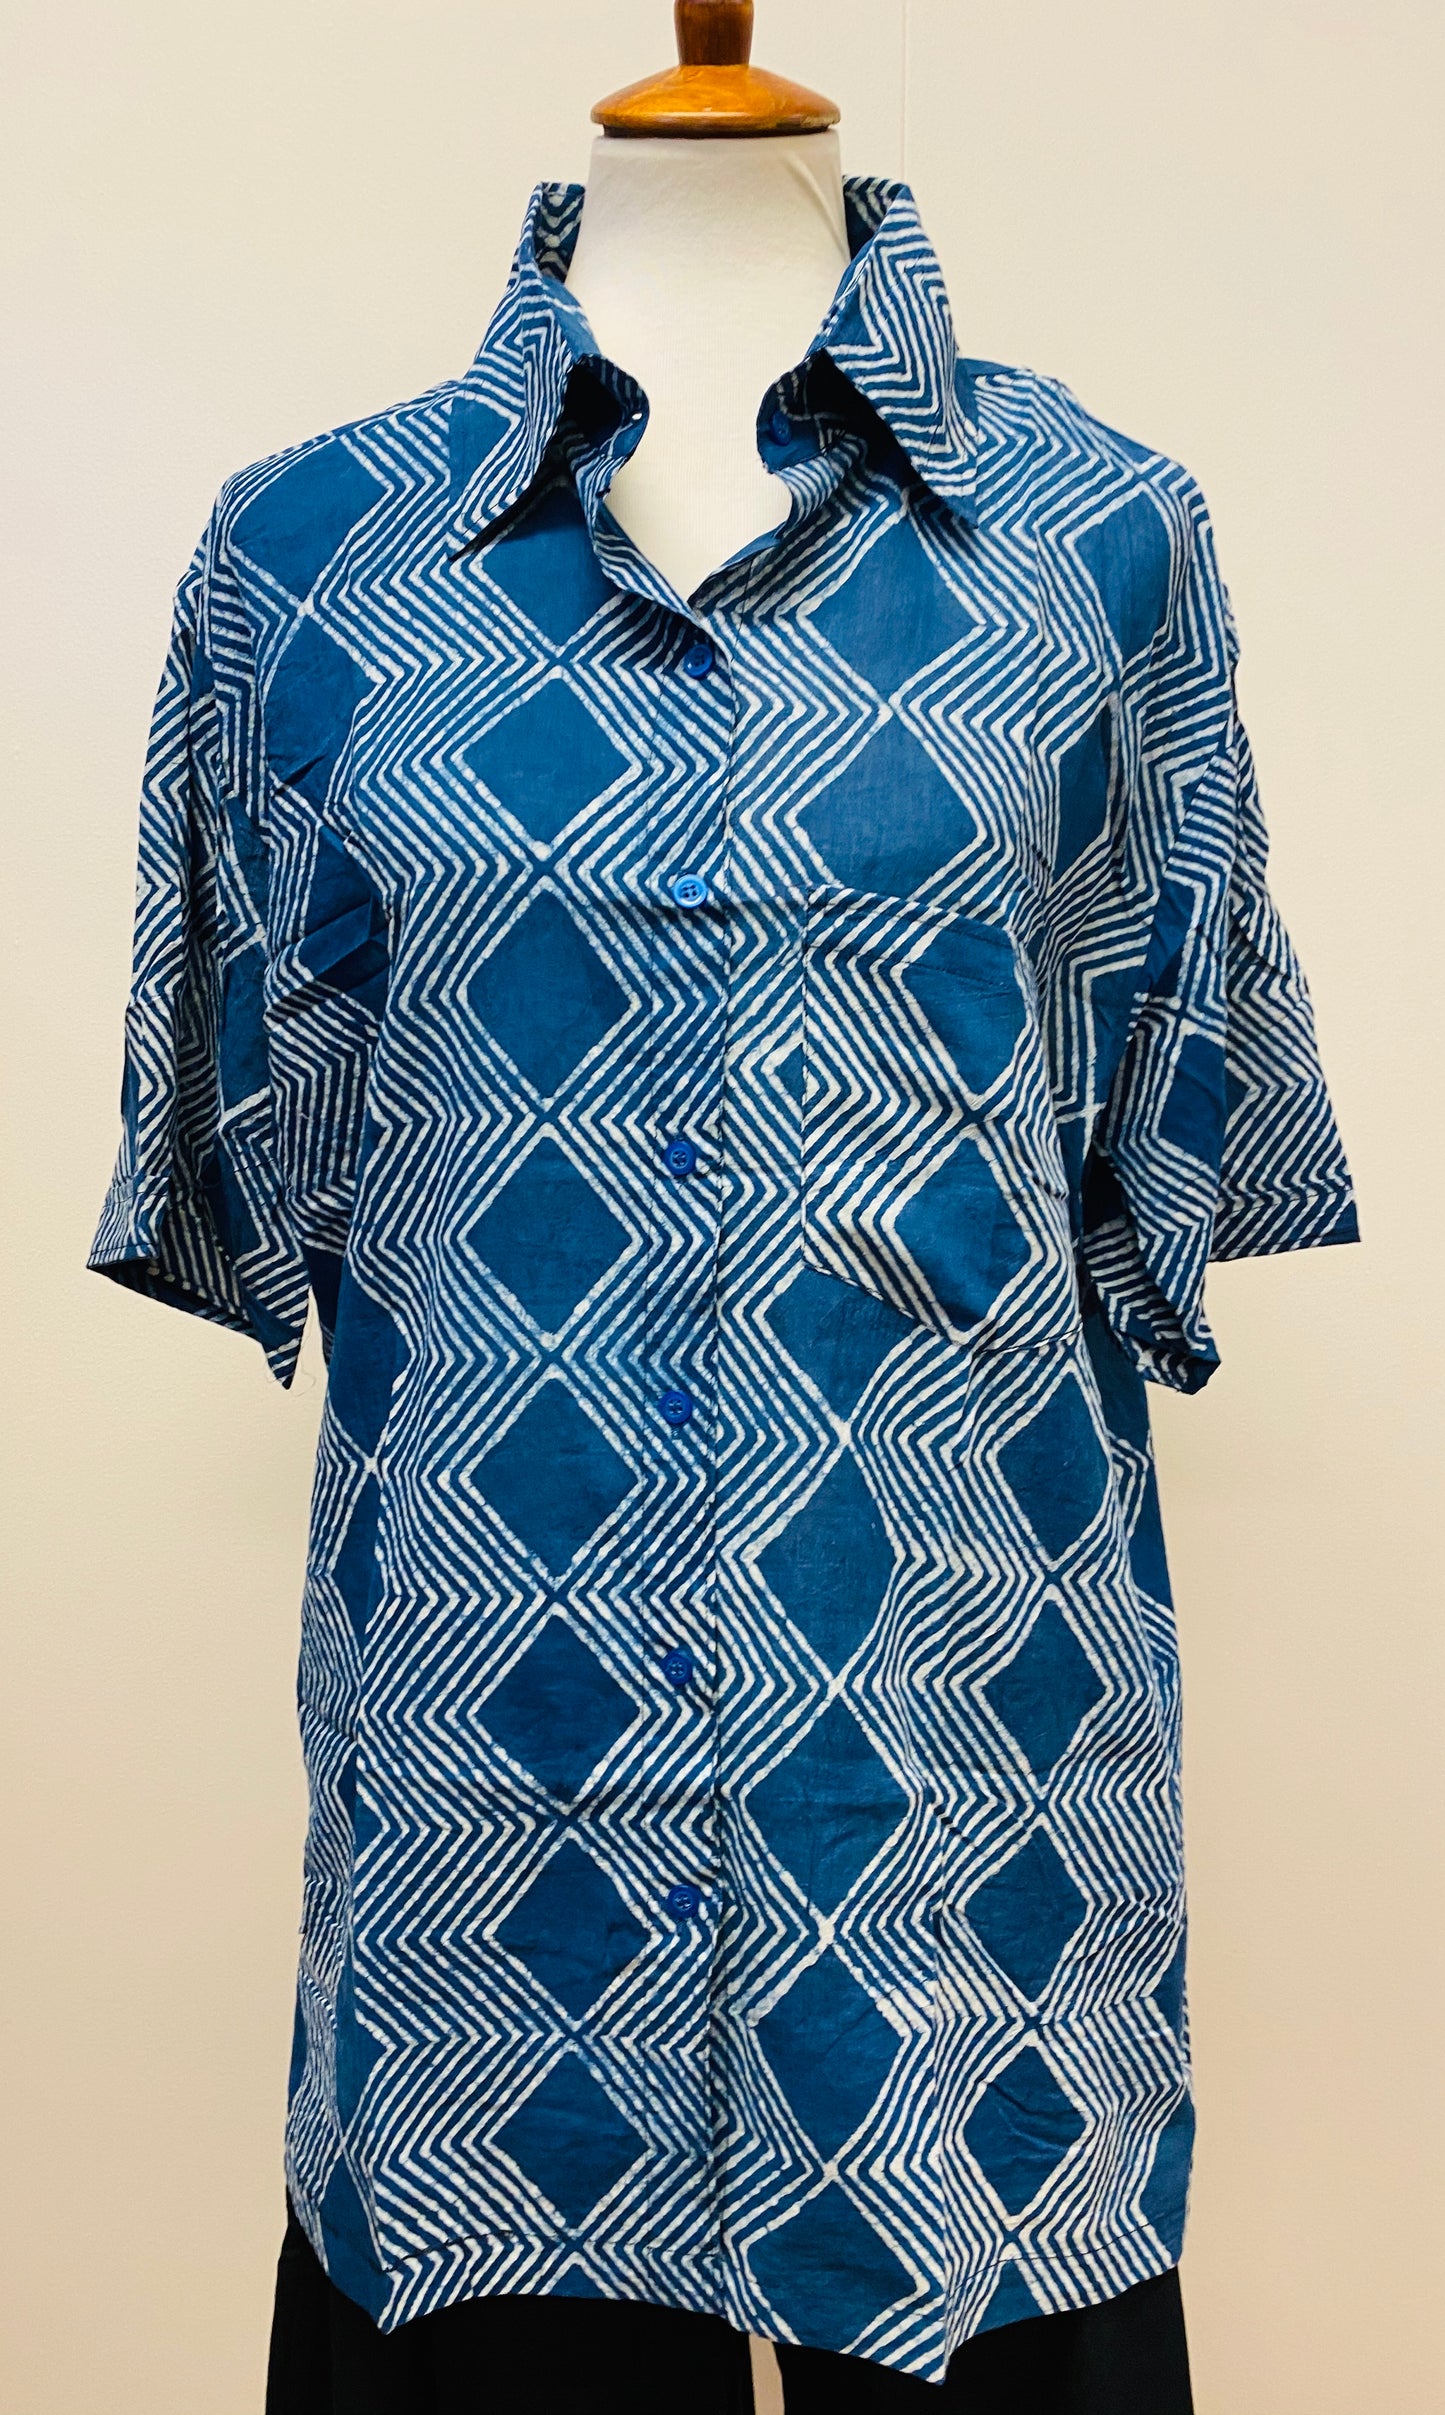 Hand Block Print Cotton Mens Button Up Shirt - 4 Patterns Available